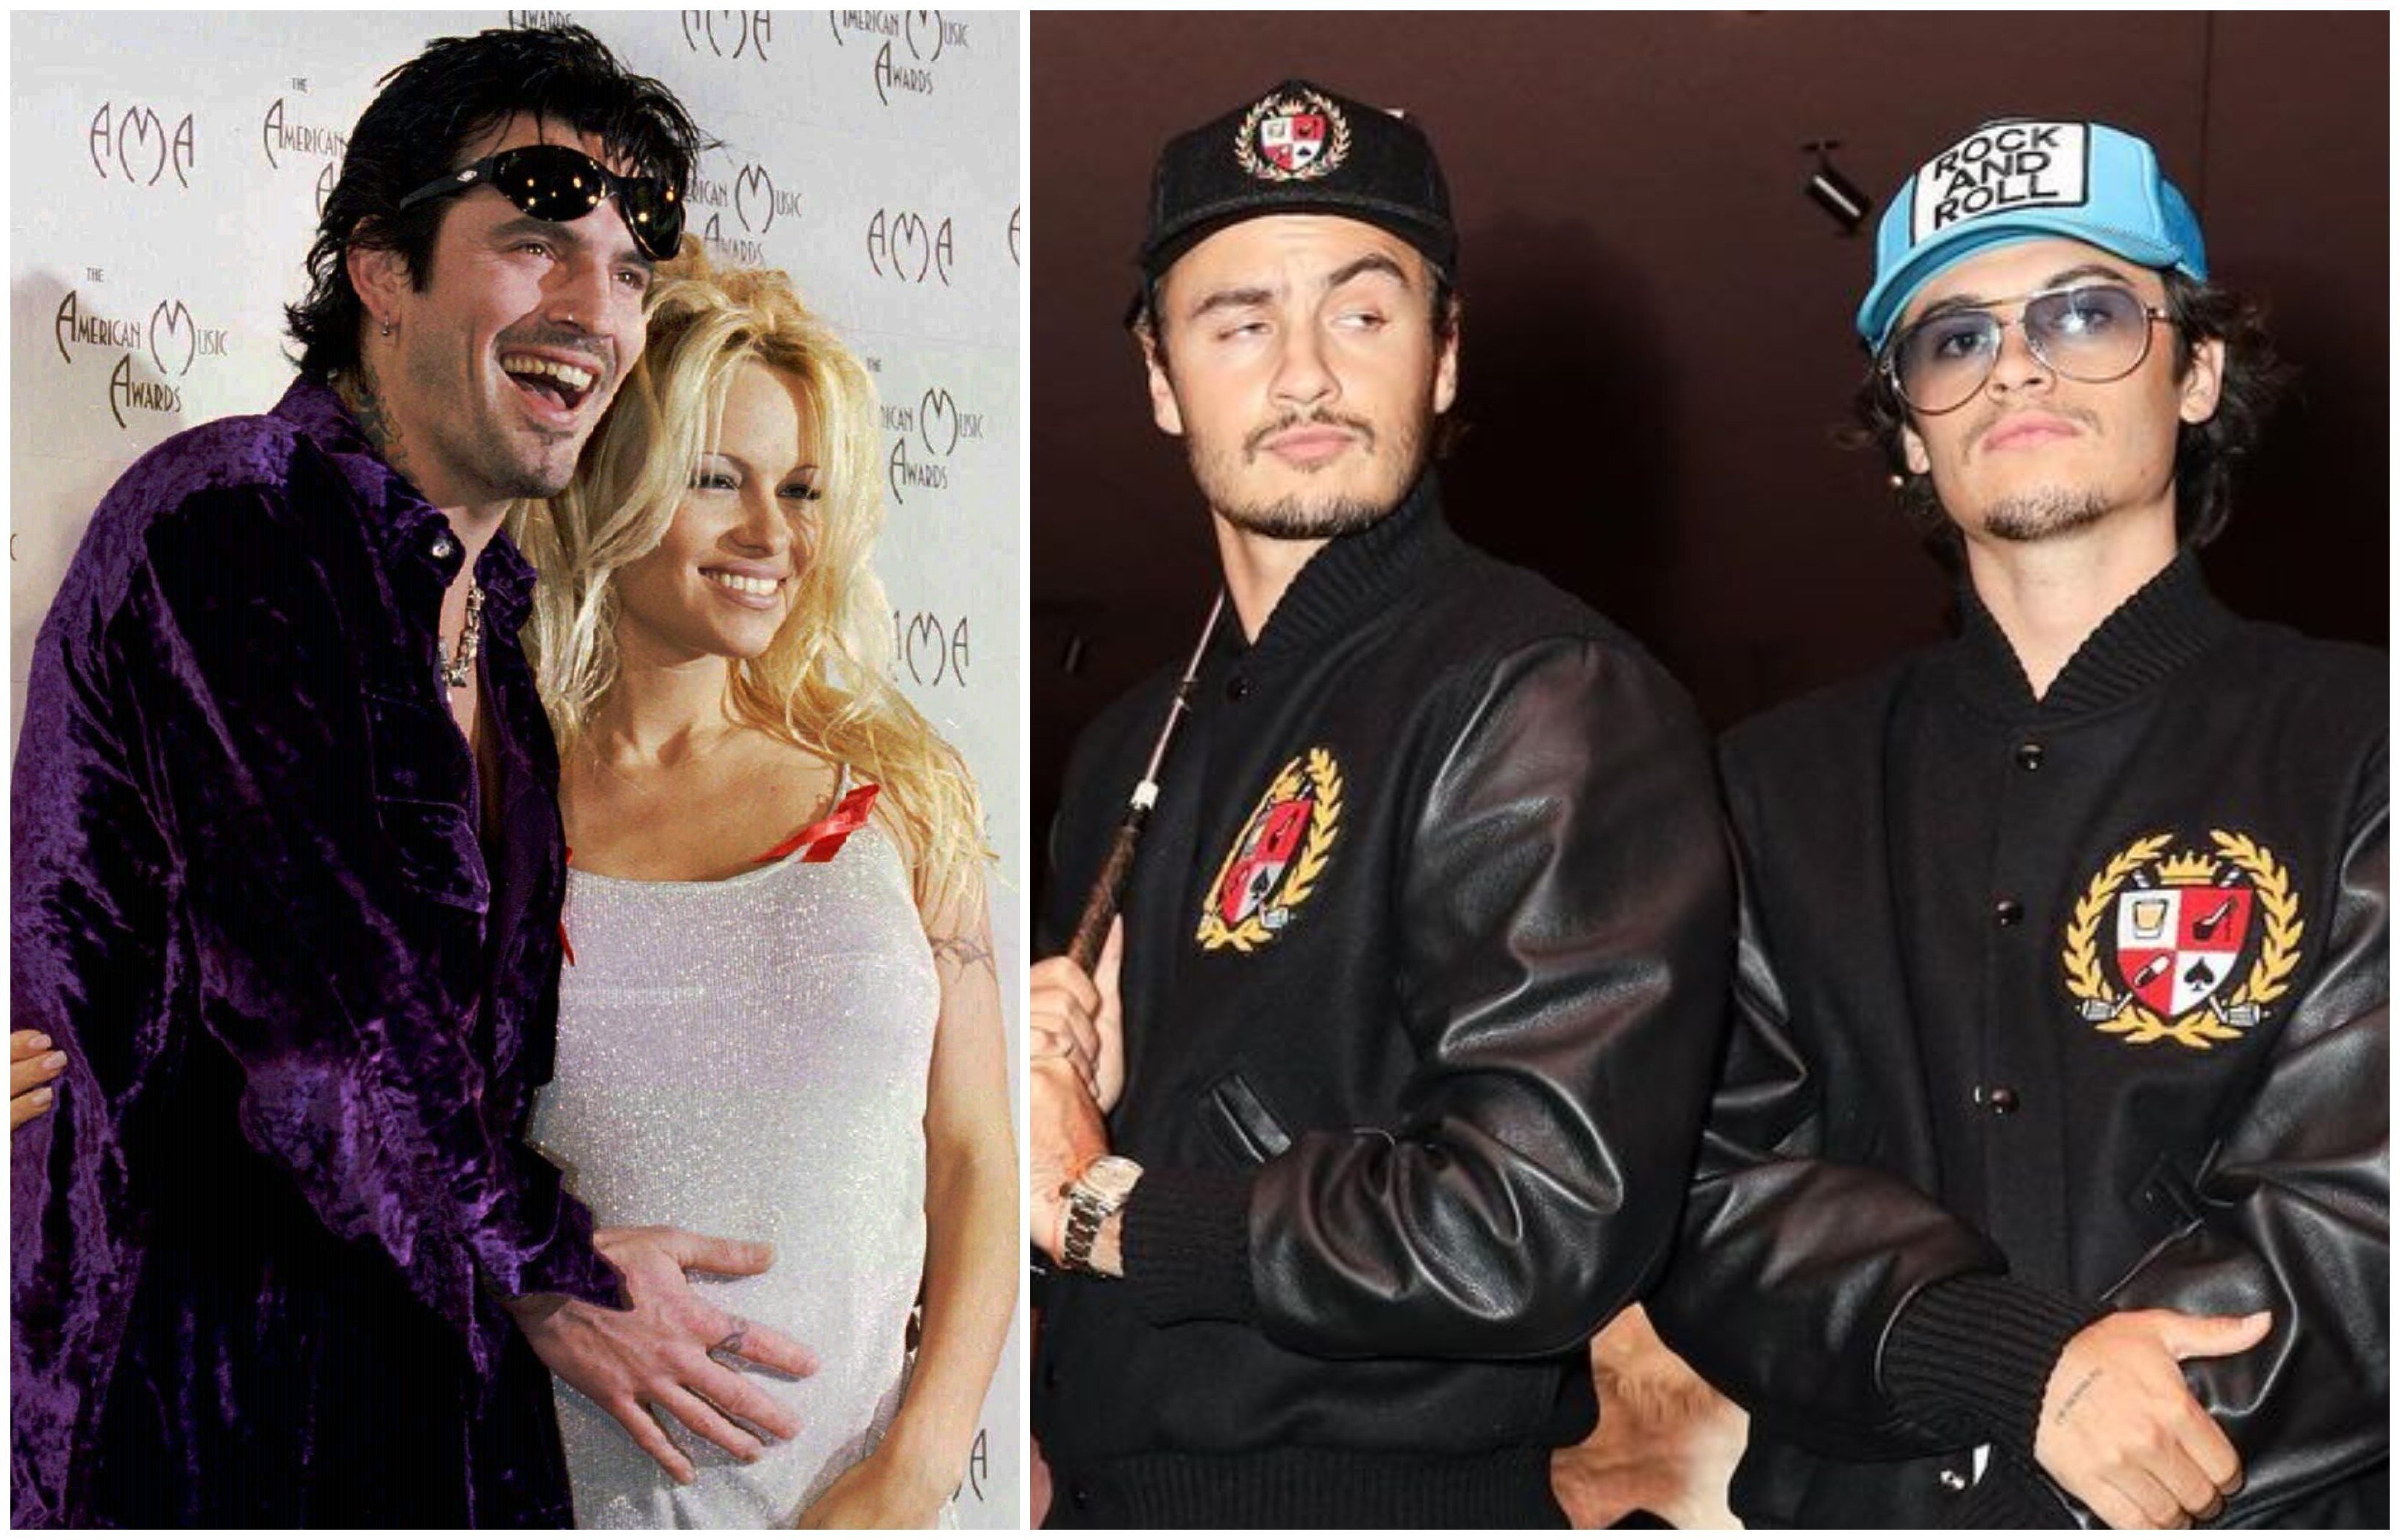 Brandon Thomas and Dylan Jagger Lee are following in the footsteps of their famous parents Pamela Anderson and Tommy Lee. Photos: Reuters, @swingersclubclassic/Instagram